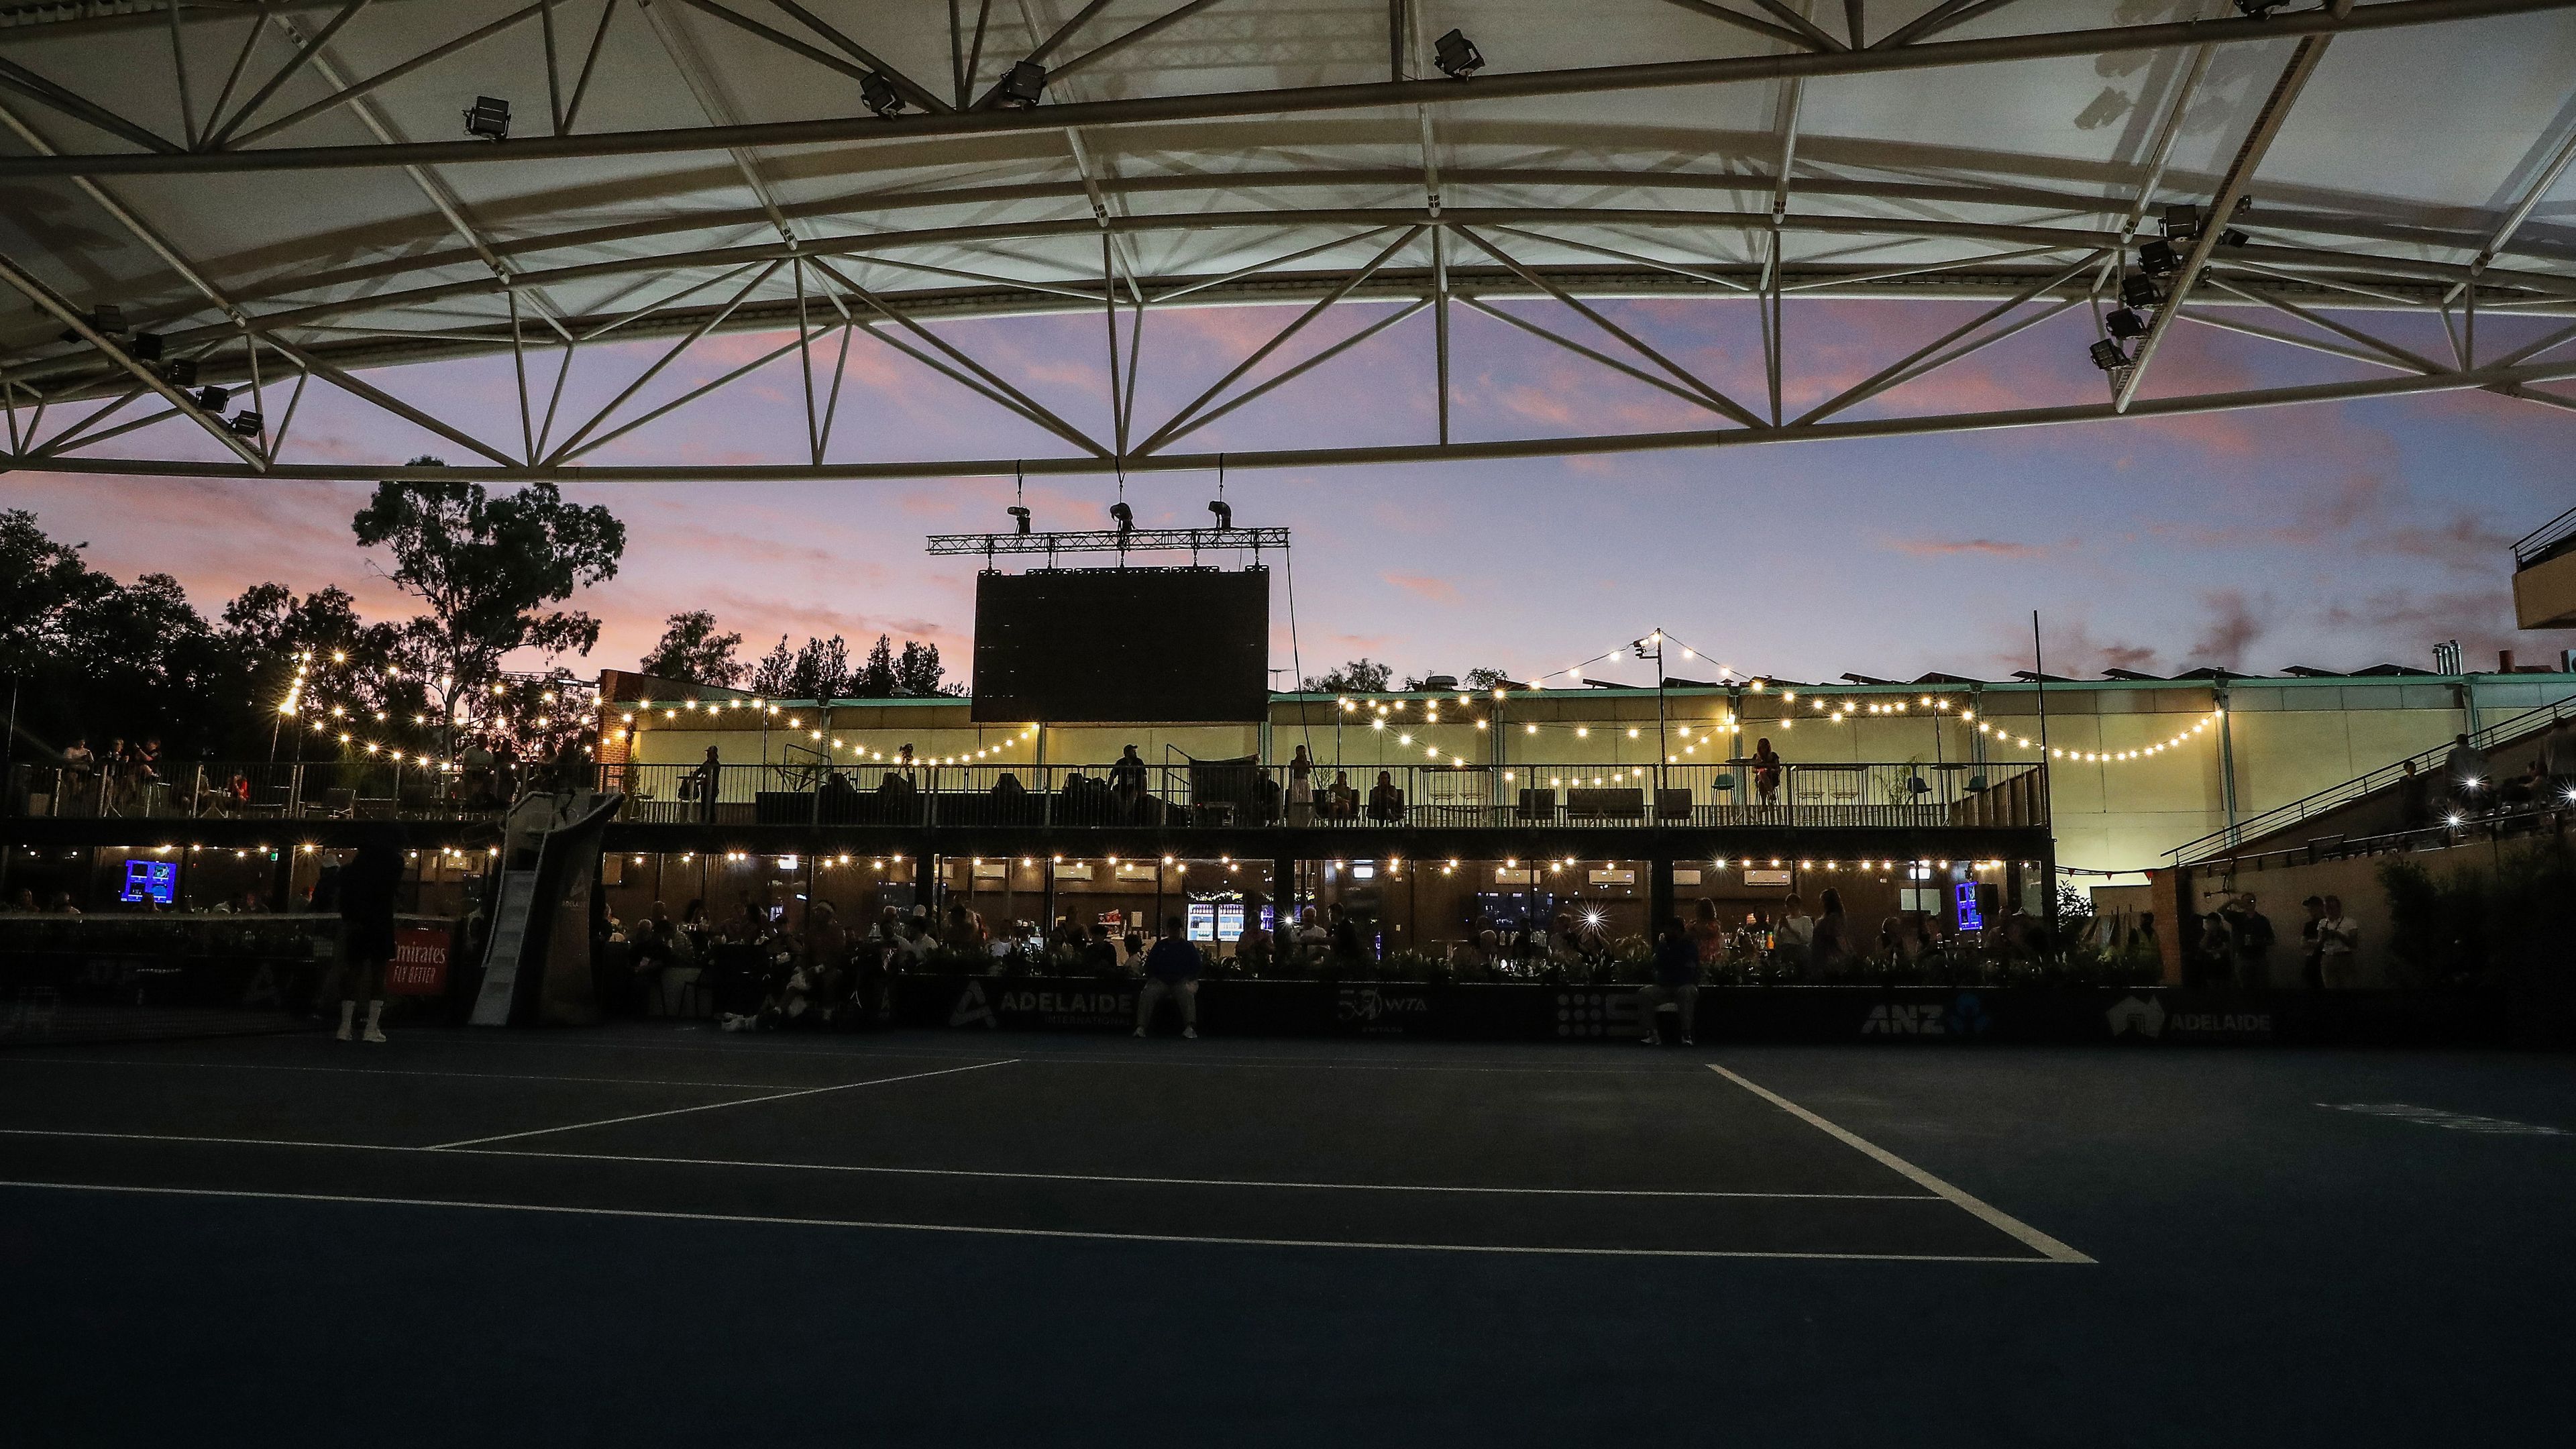 Lights go out on centre court as Jason Kubler of Australia competes against Tomas Martin Etcheverry of Argentina during day two of the 2023 Adelaide International at Memorial Drive on January 10, 2023 in Adelaide, Australia. (Photo by Sarah Reed/Getty Images)